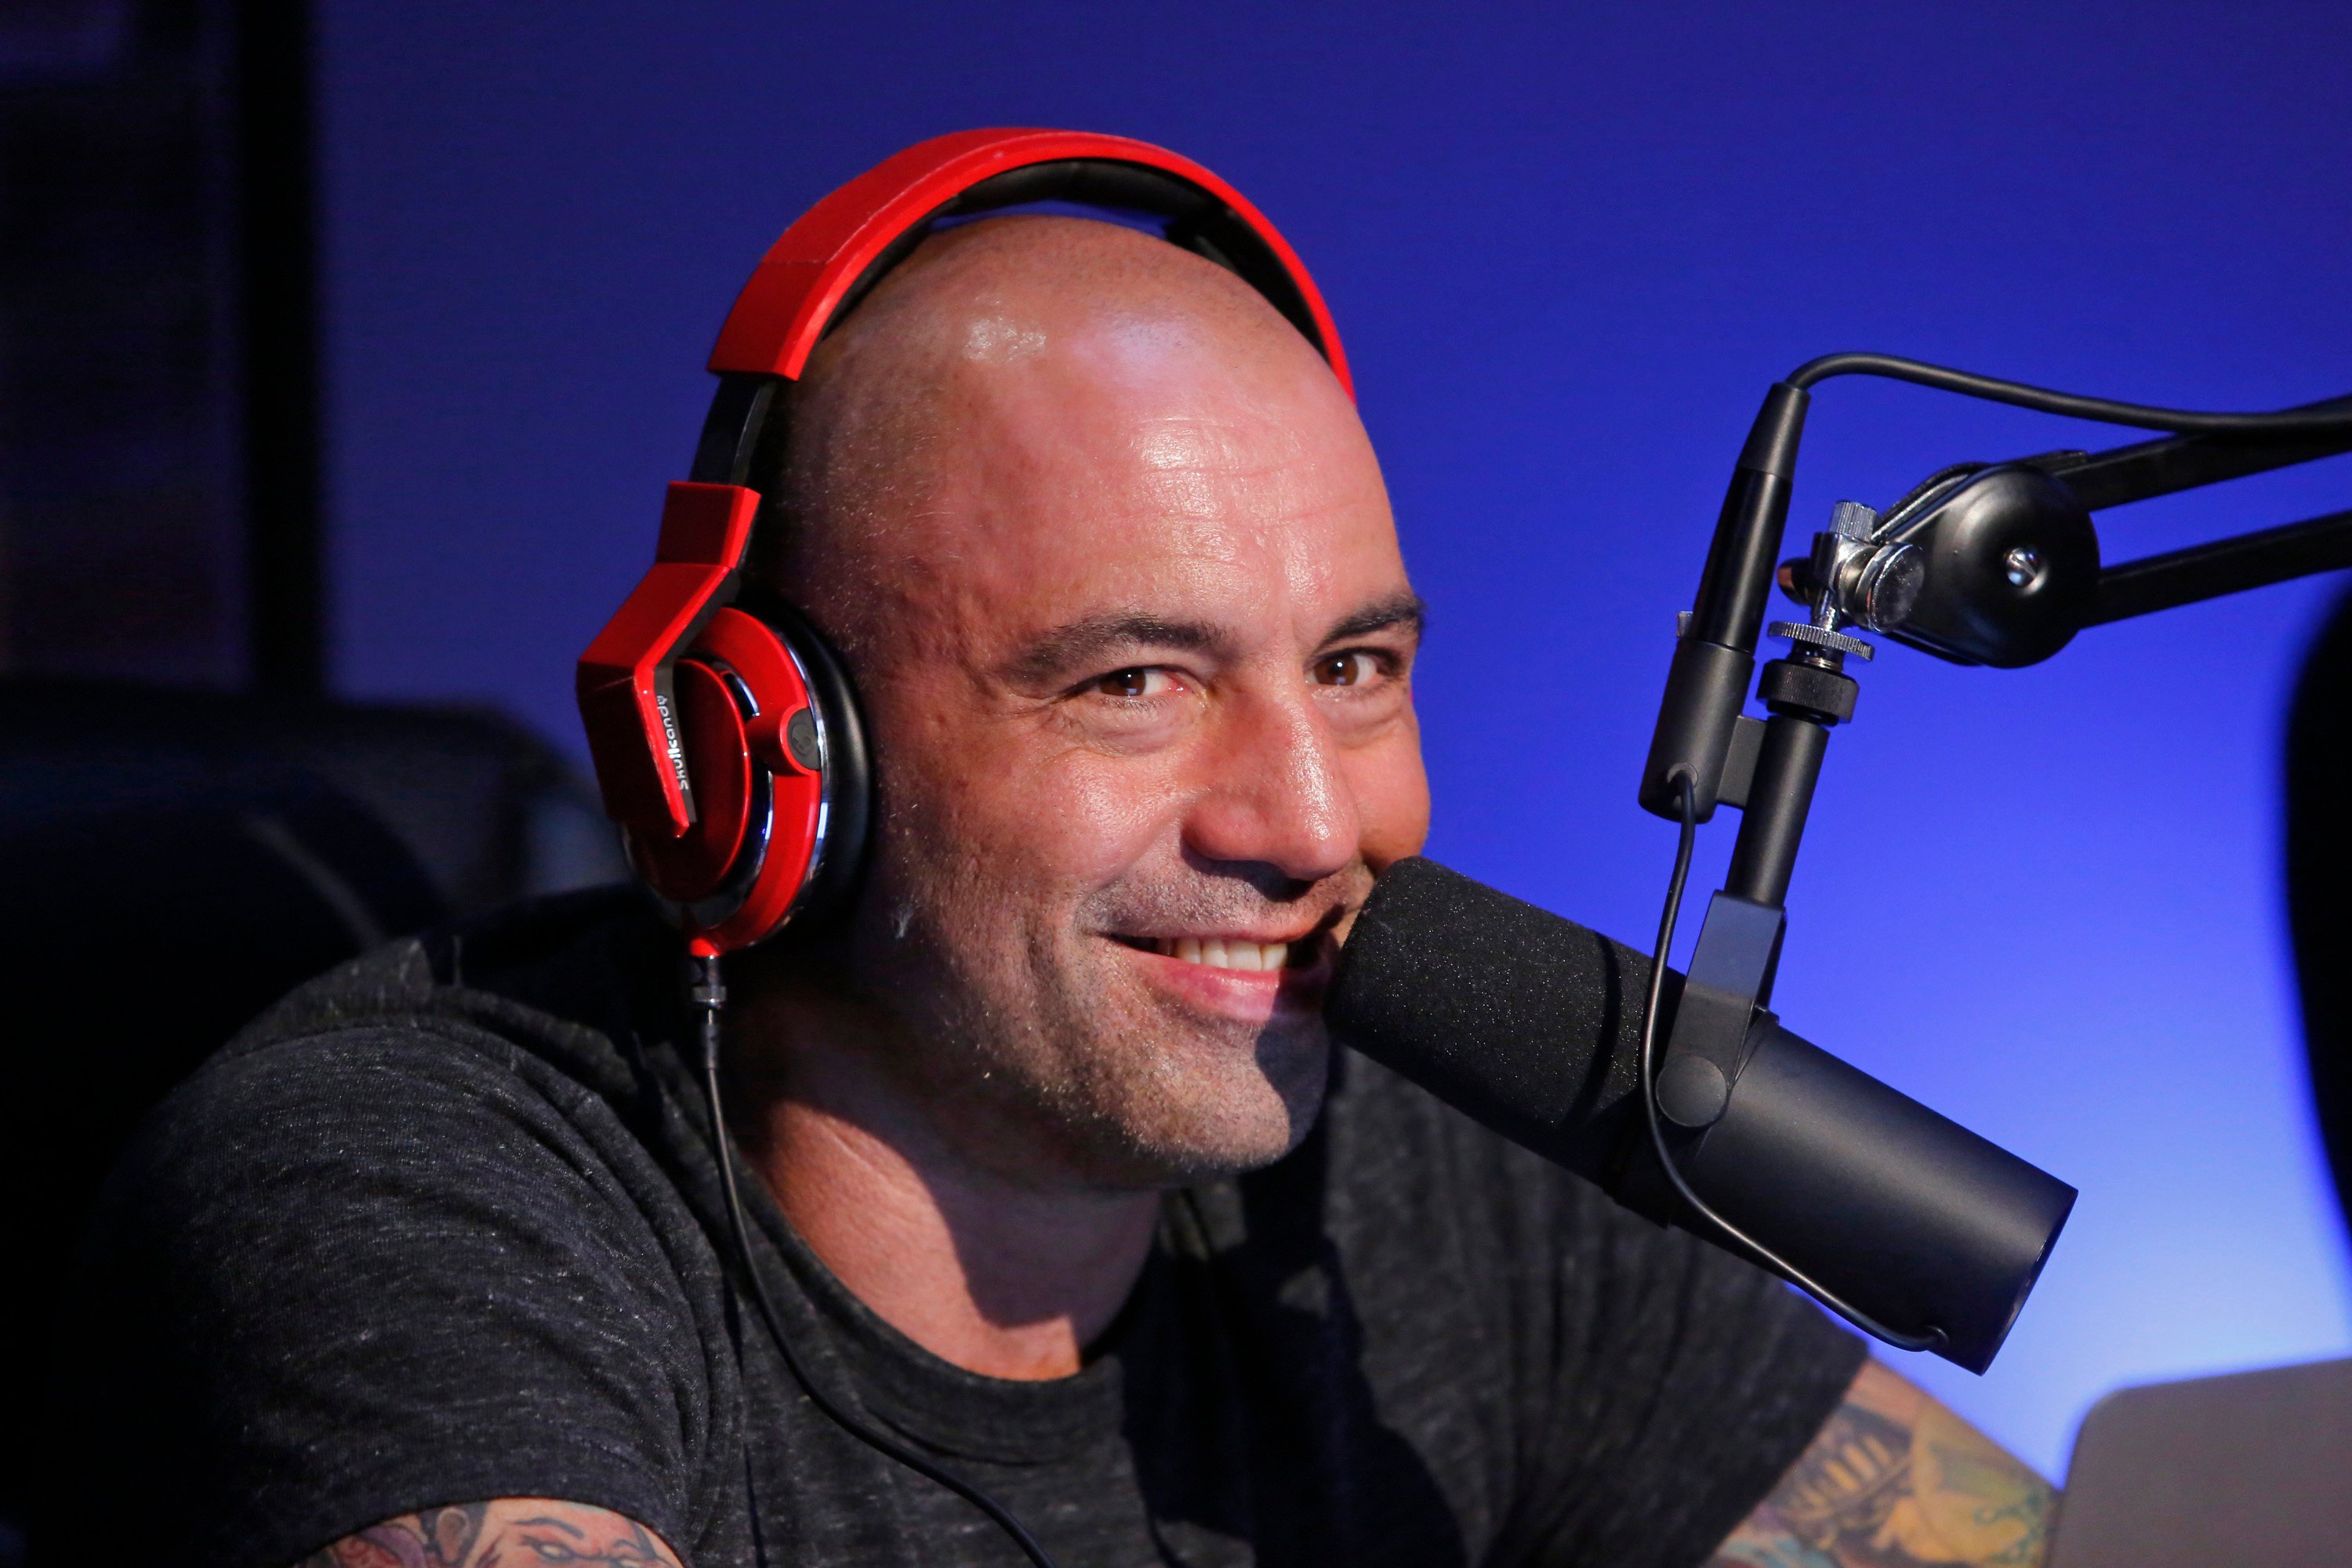 Joe Rogan is a comedian, podcaster and UFC commentator, and has even been an actor. Photo: Getty Images